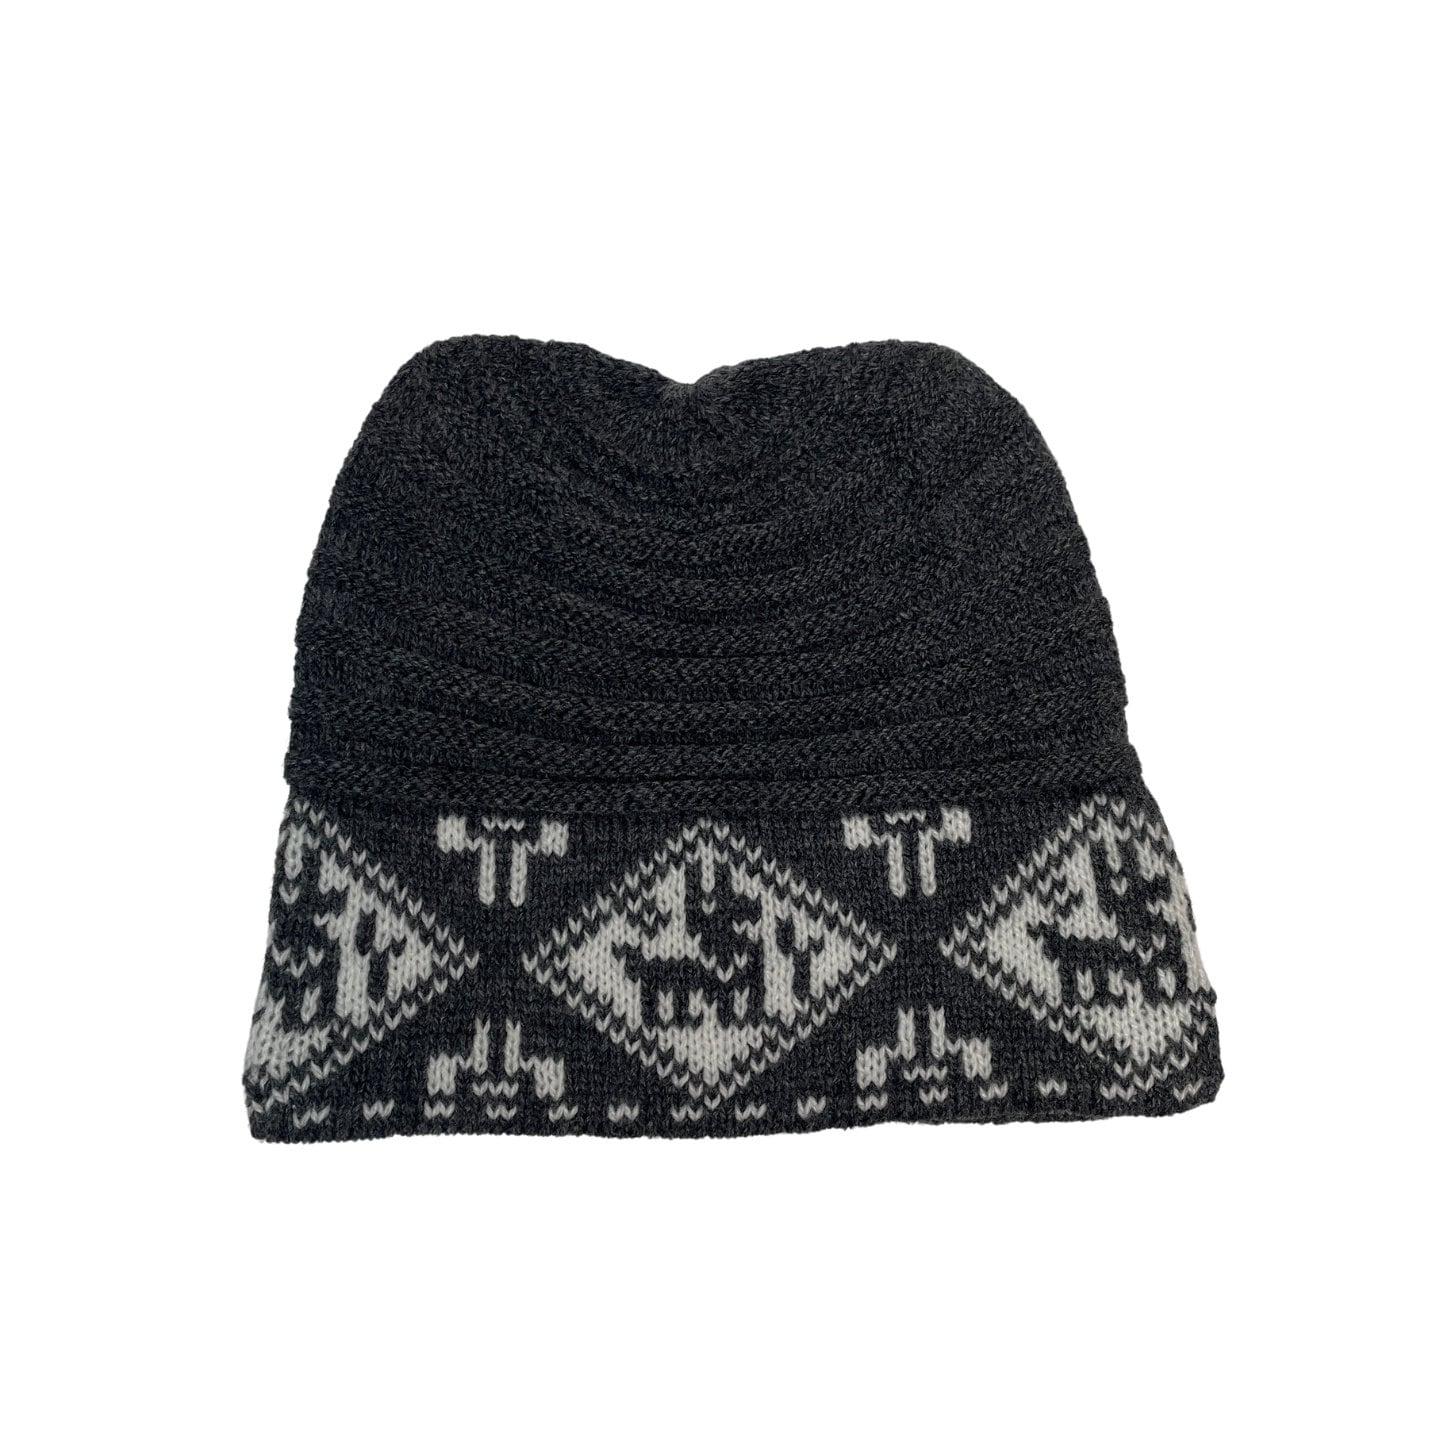 Knitted Alpaca Beanie Hat | Black & Gray Colors